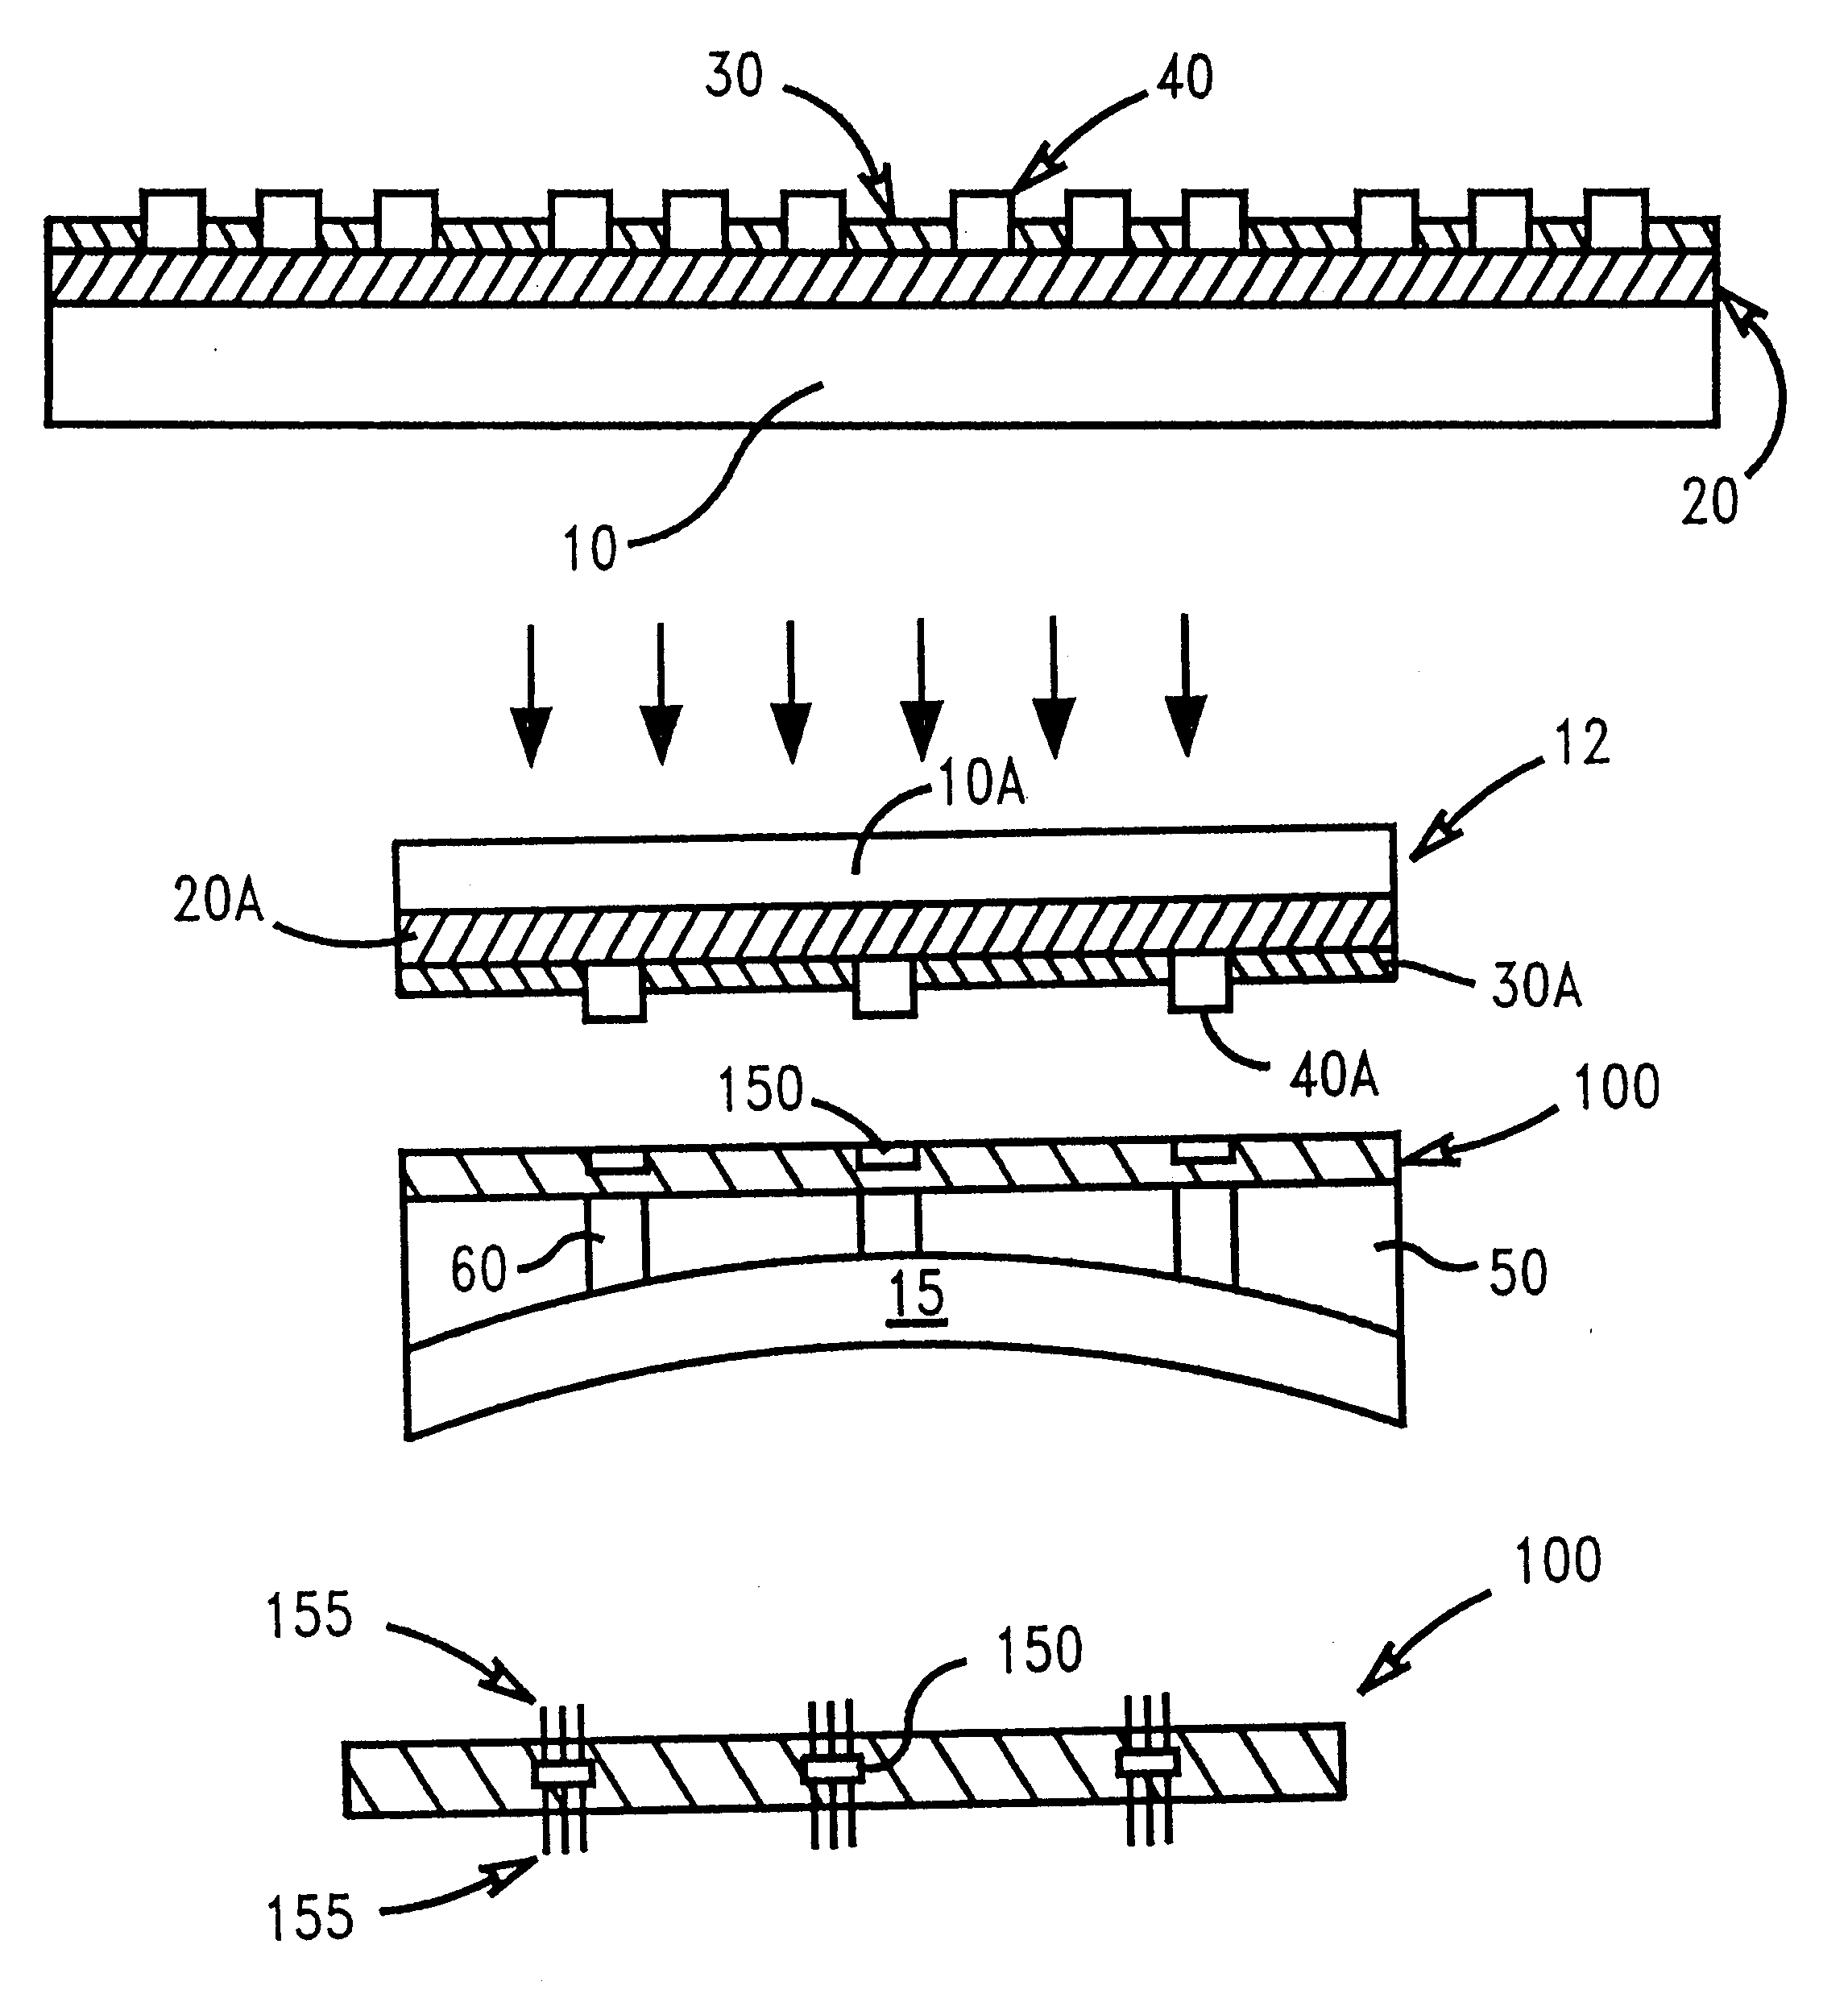 Method of interconnecting electronic components using a plurality of conductive studs